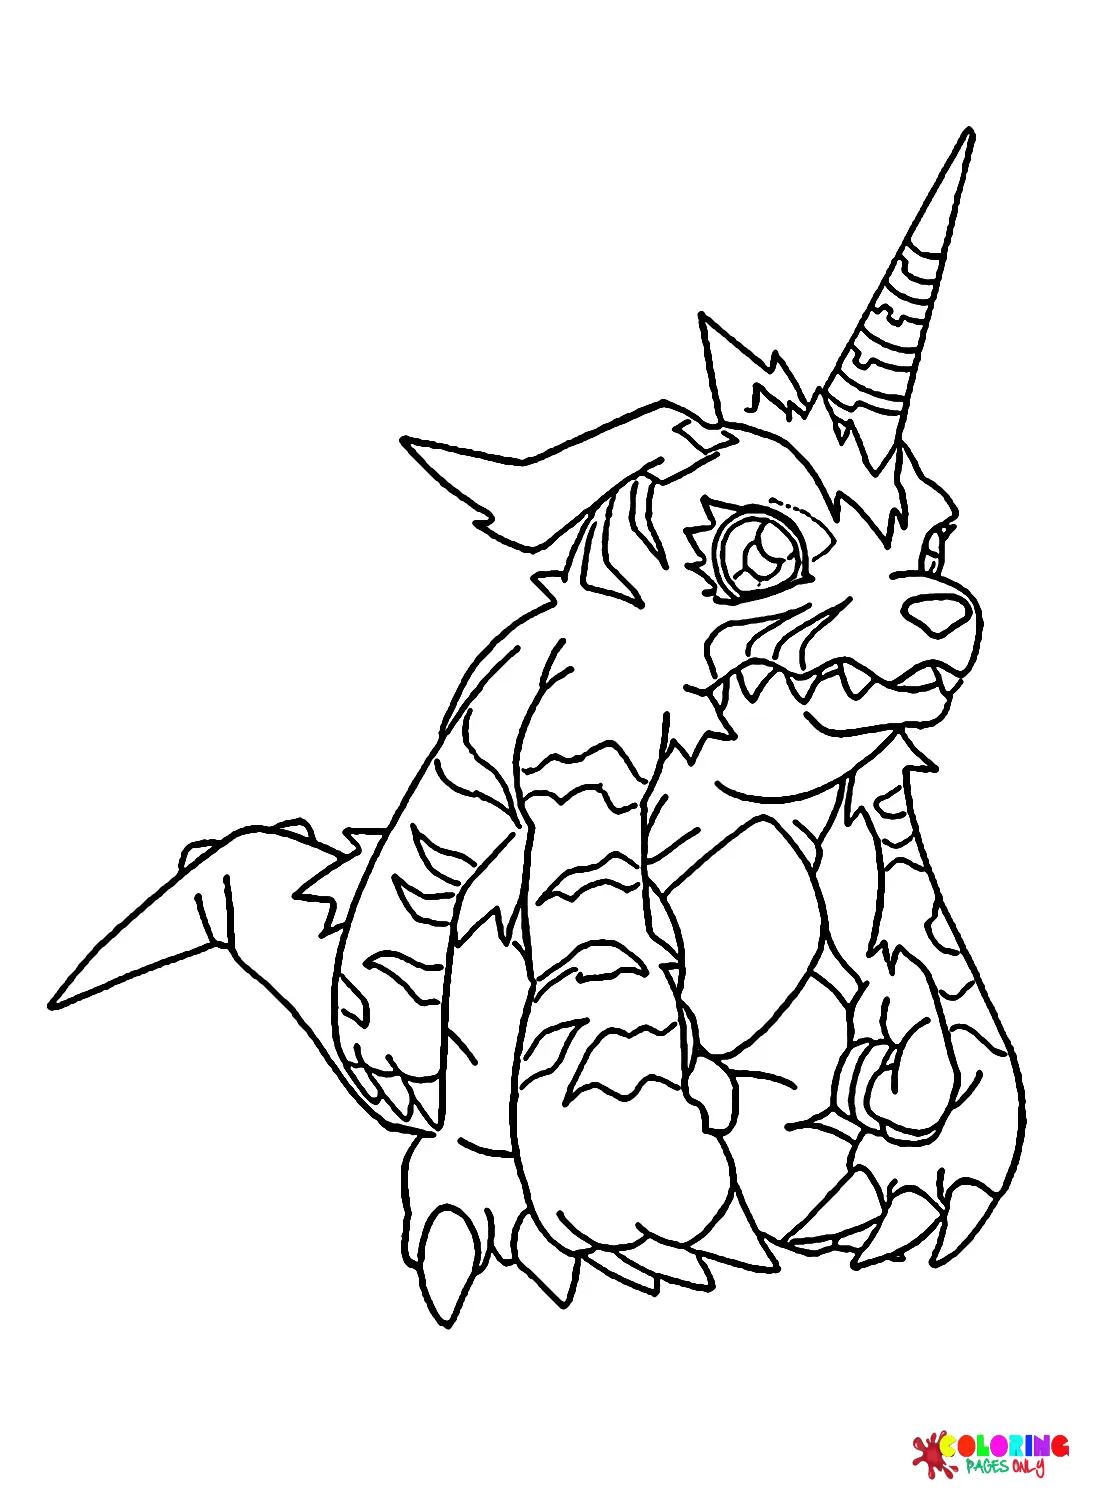 Gabumon Coloring Pages